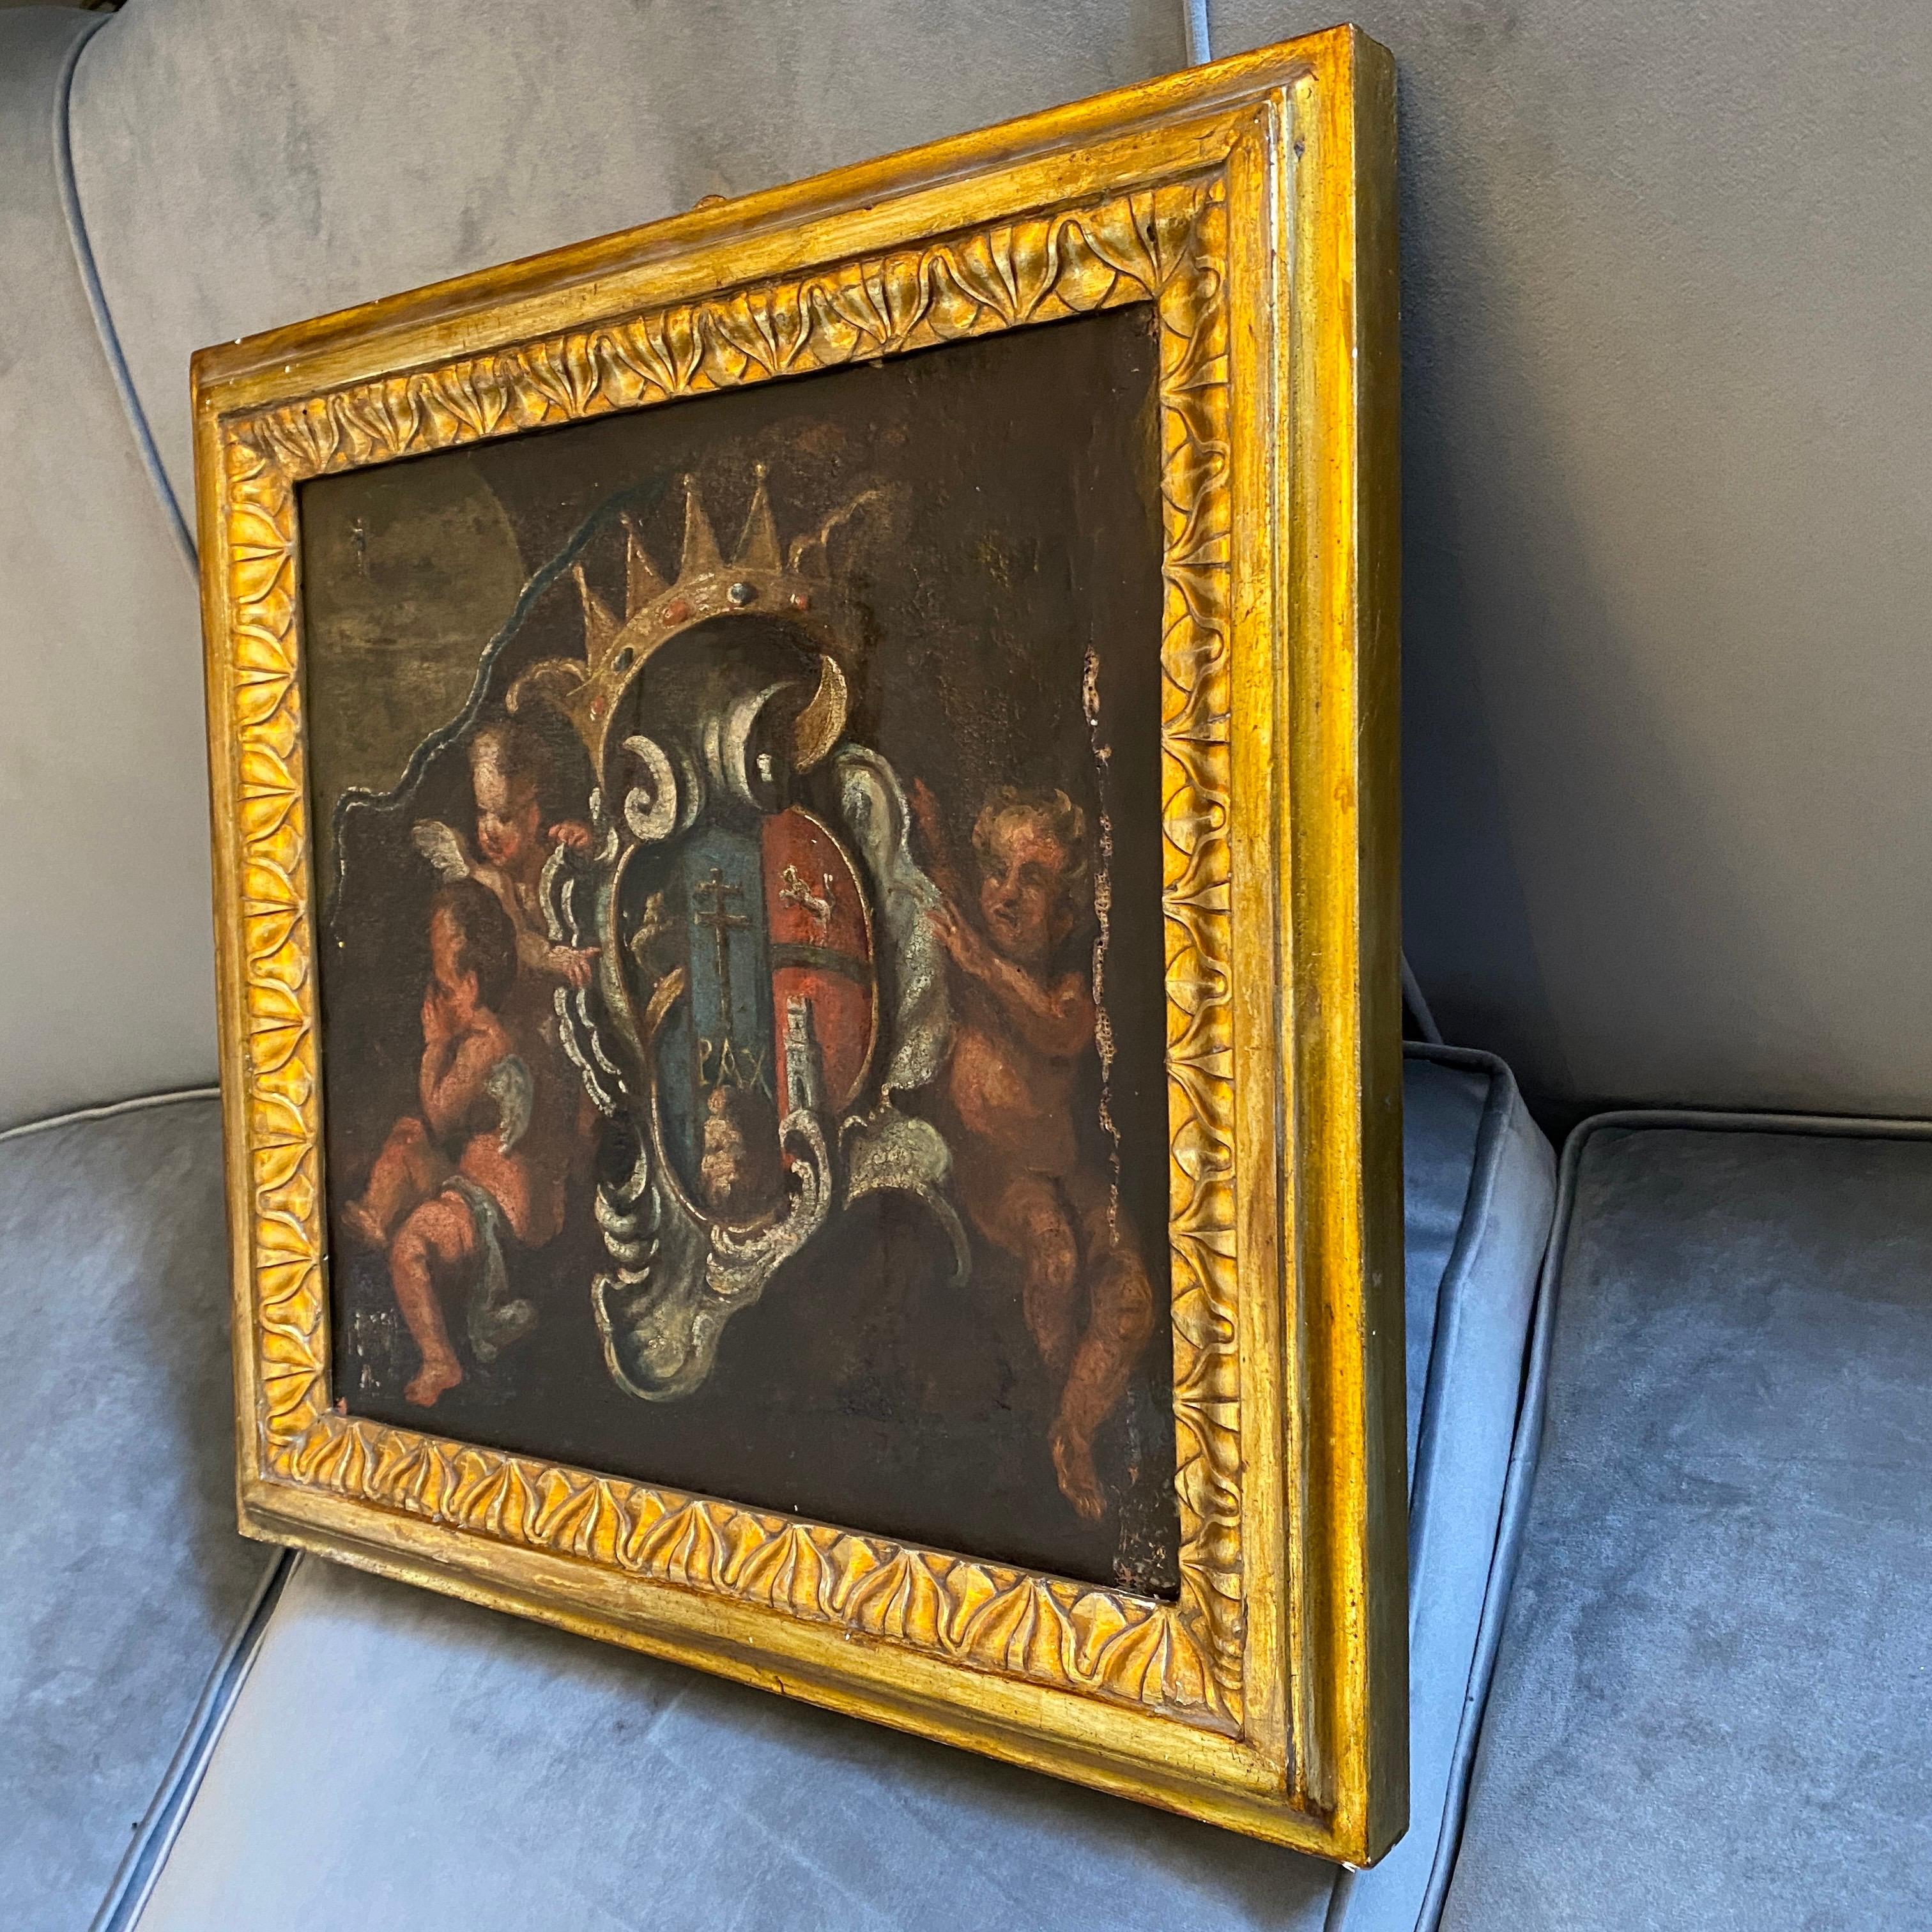 A Baroque Italian framed oil on canvas depicting three angels holding a noble coat of arms, the antique gilt wood frame is from the mid-19th century.